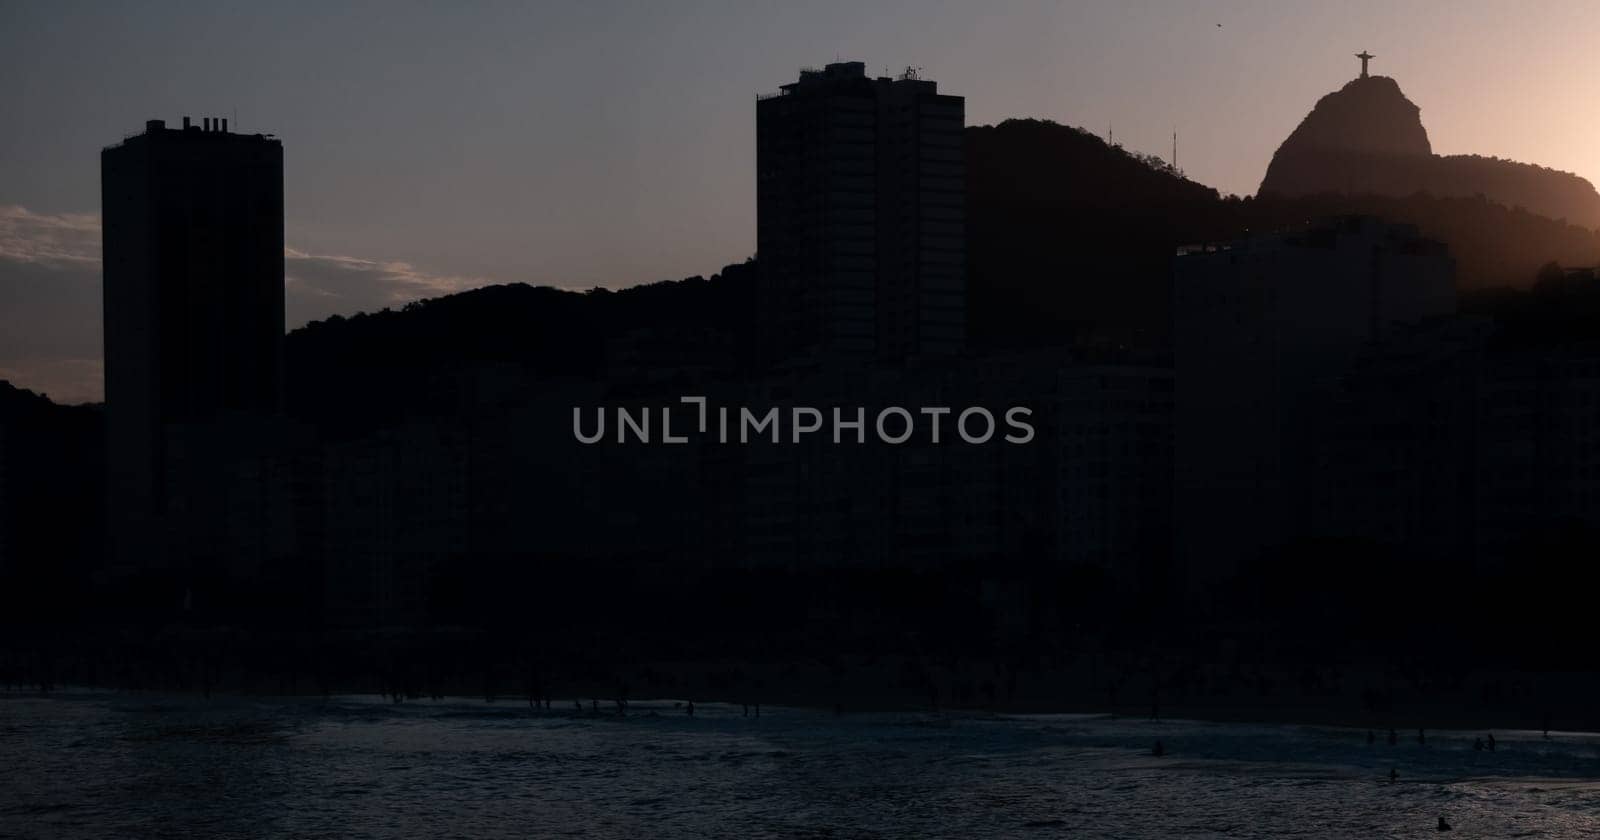 Silhouette of Rio's skyline with the Christ the Redeemer statue at sunset.